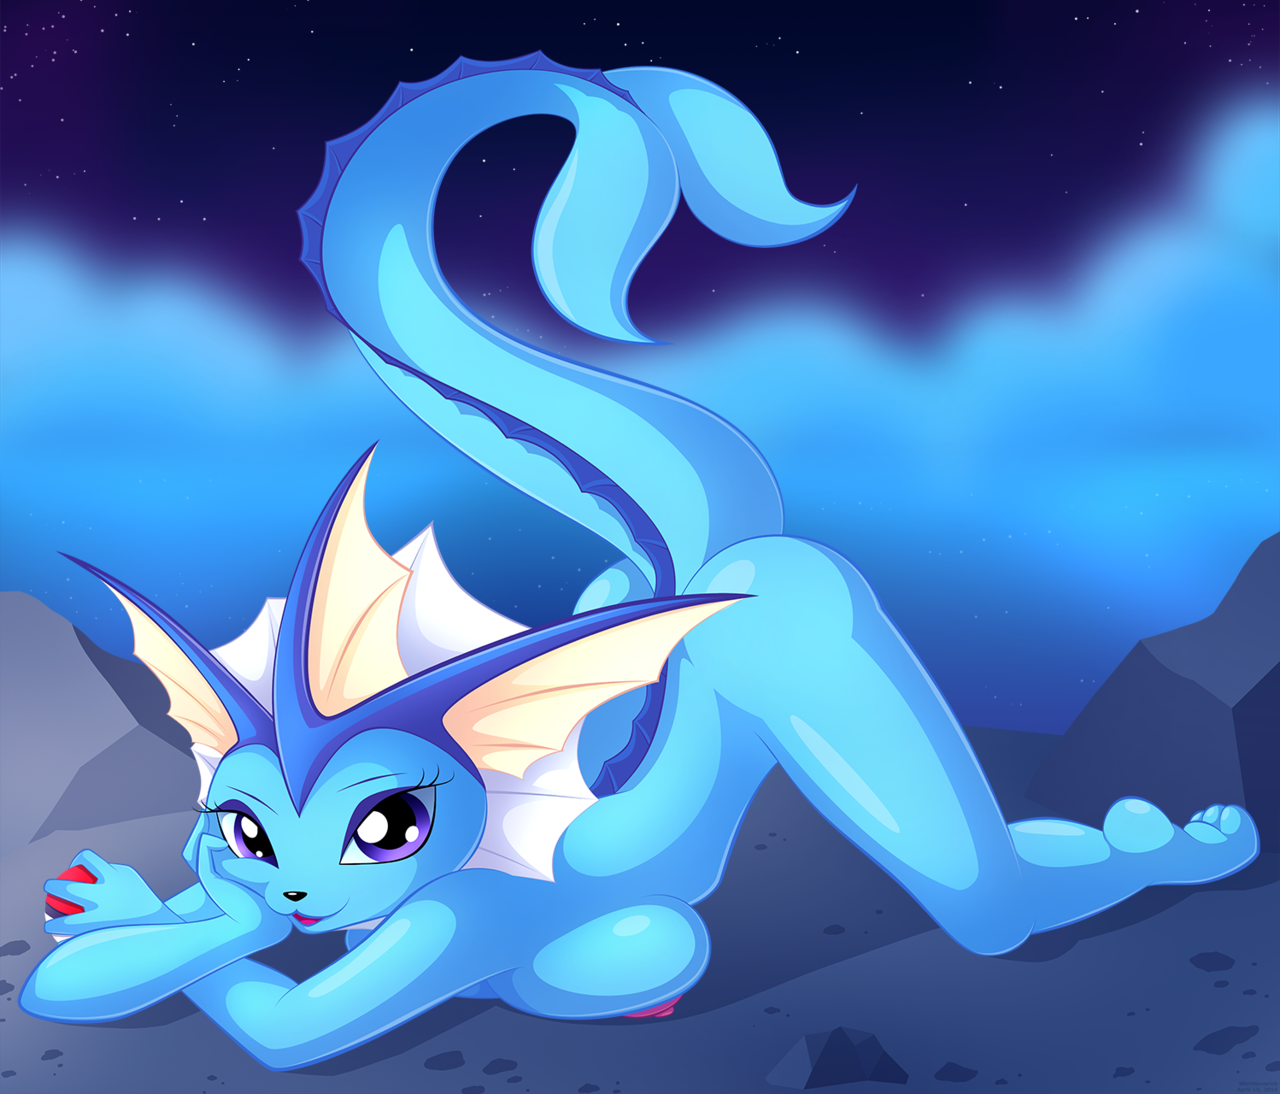 Vaporeon: Up for a little skinny dipping? 